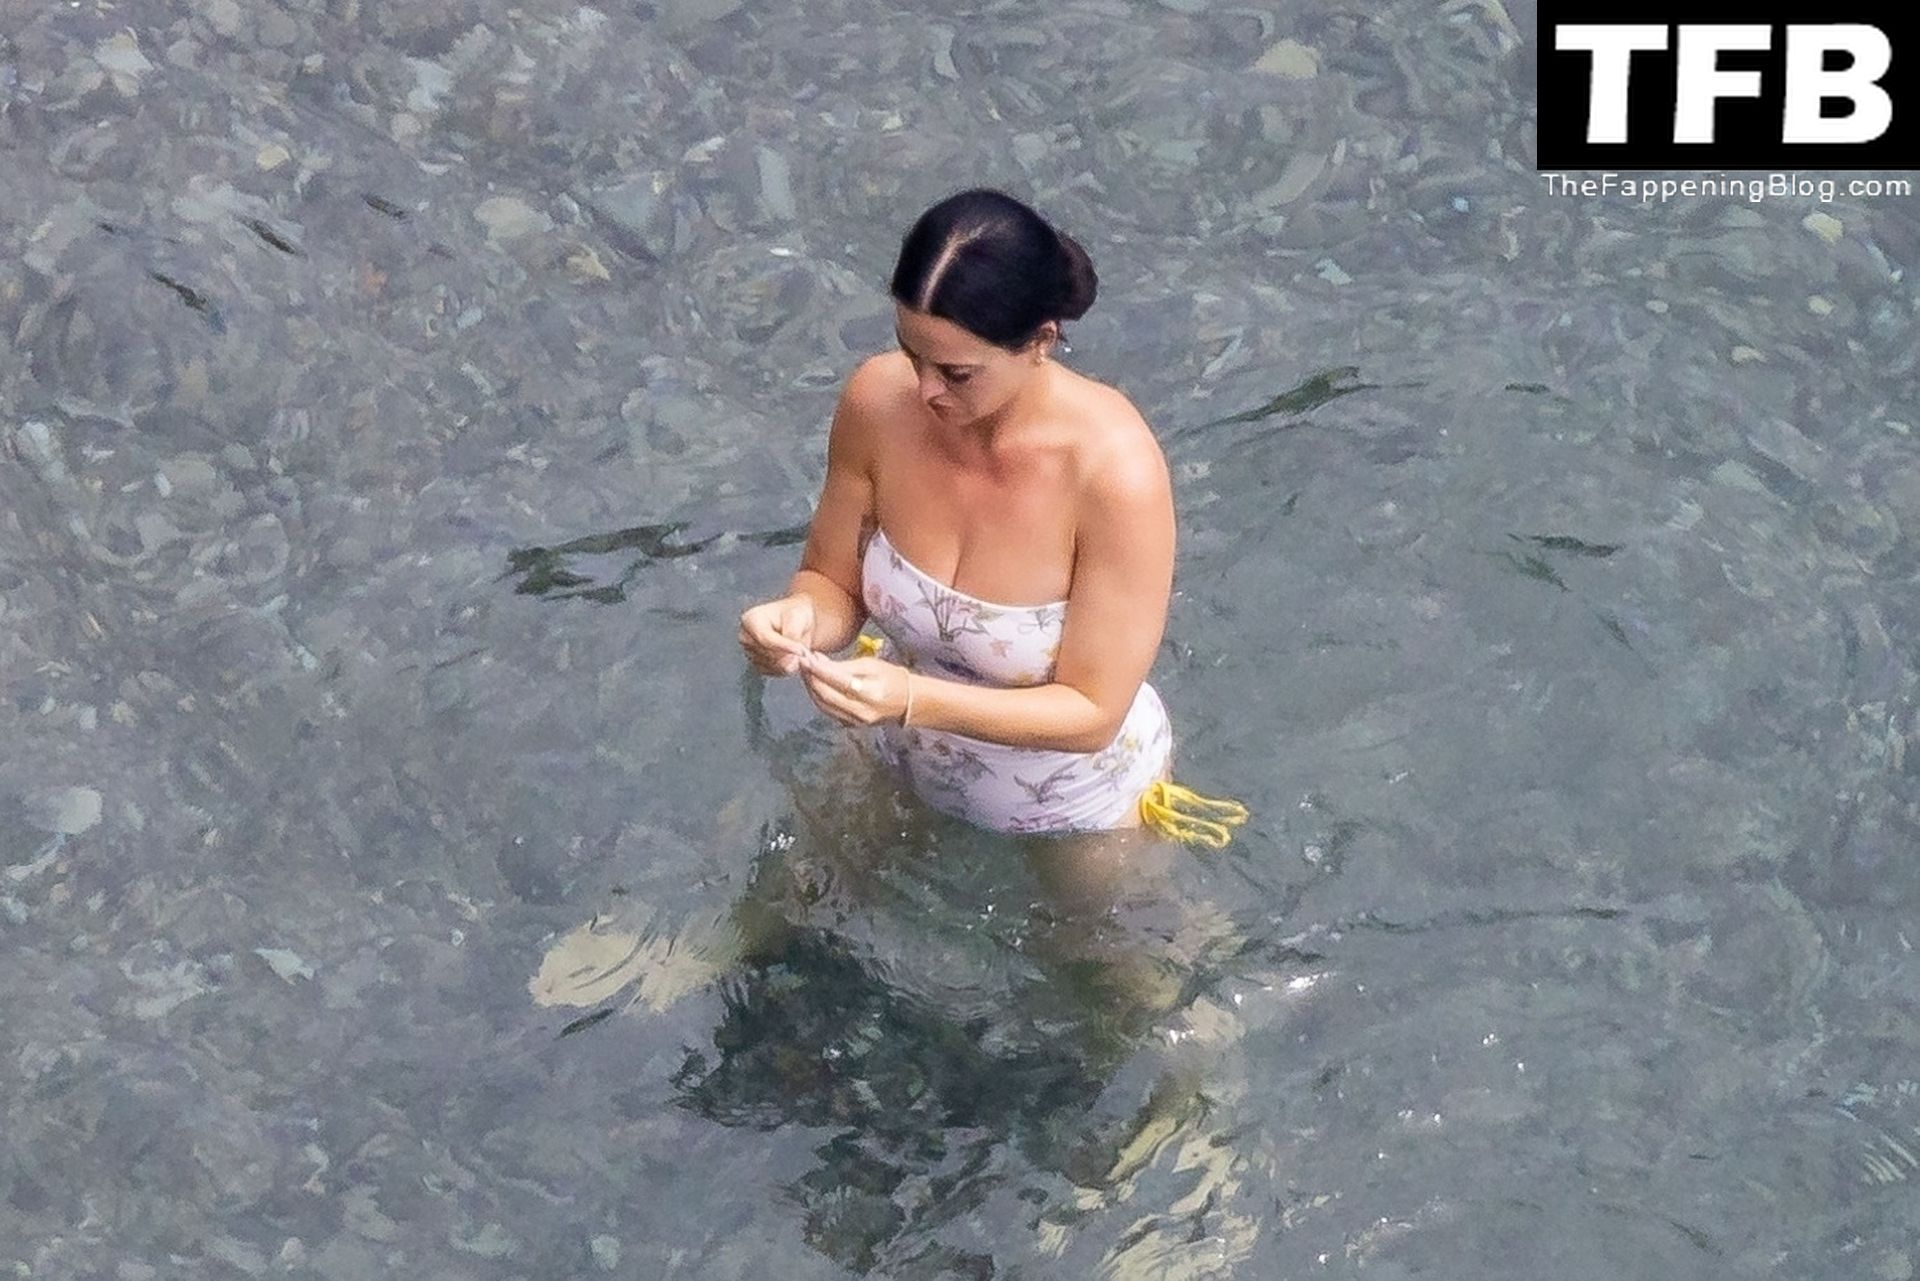 Katy Perry Sexy The Fappening Blog 35 - Katy Perry Rocks a Strapless Swimsuit While Enjoying a Beach Day with Orlando Bloom in Positano (105 Photos)